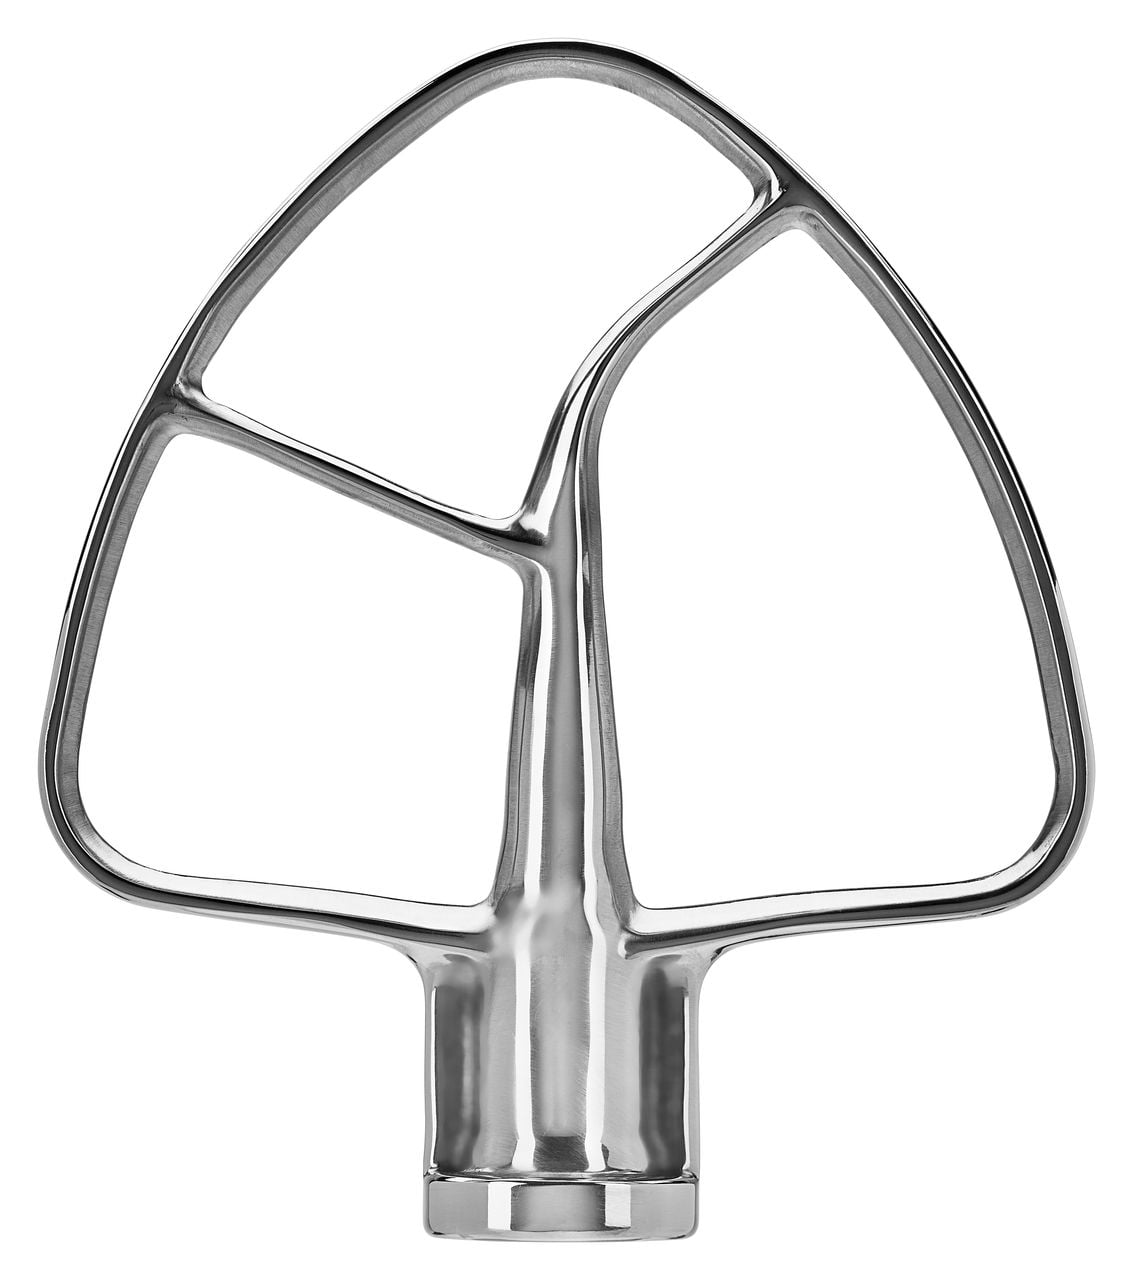  5-6QT Stainless Steel Flat Beater for KitchenAid Stand Mixer, Kitchen  Aid Paddle Attachment Accessories/No coating/Dishwasher Safe Replacement  for kitchenaid Professional 5 Plus and 600 Series Mixer: Home & Kitchen